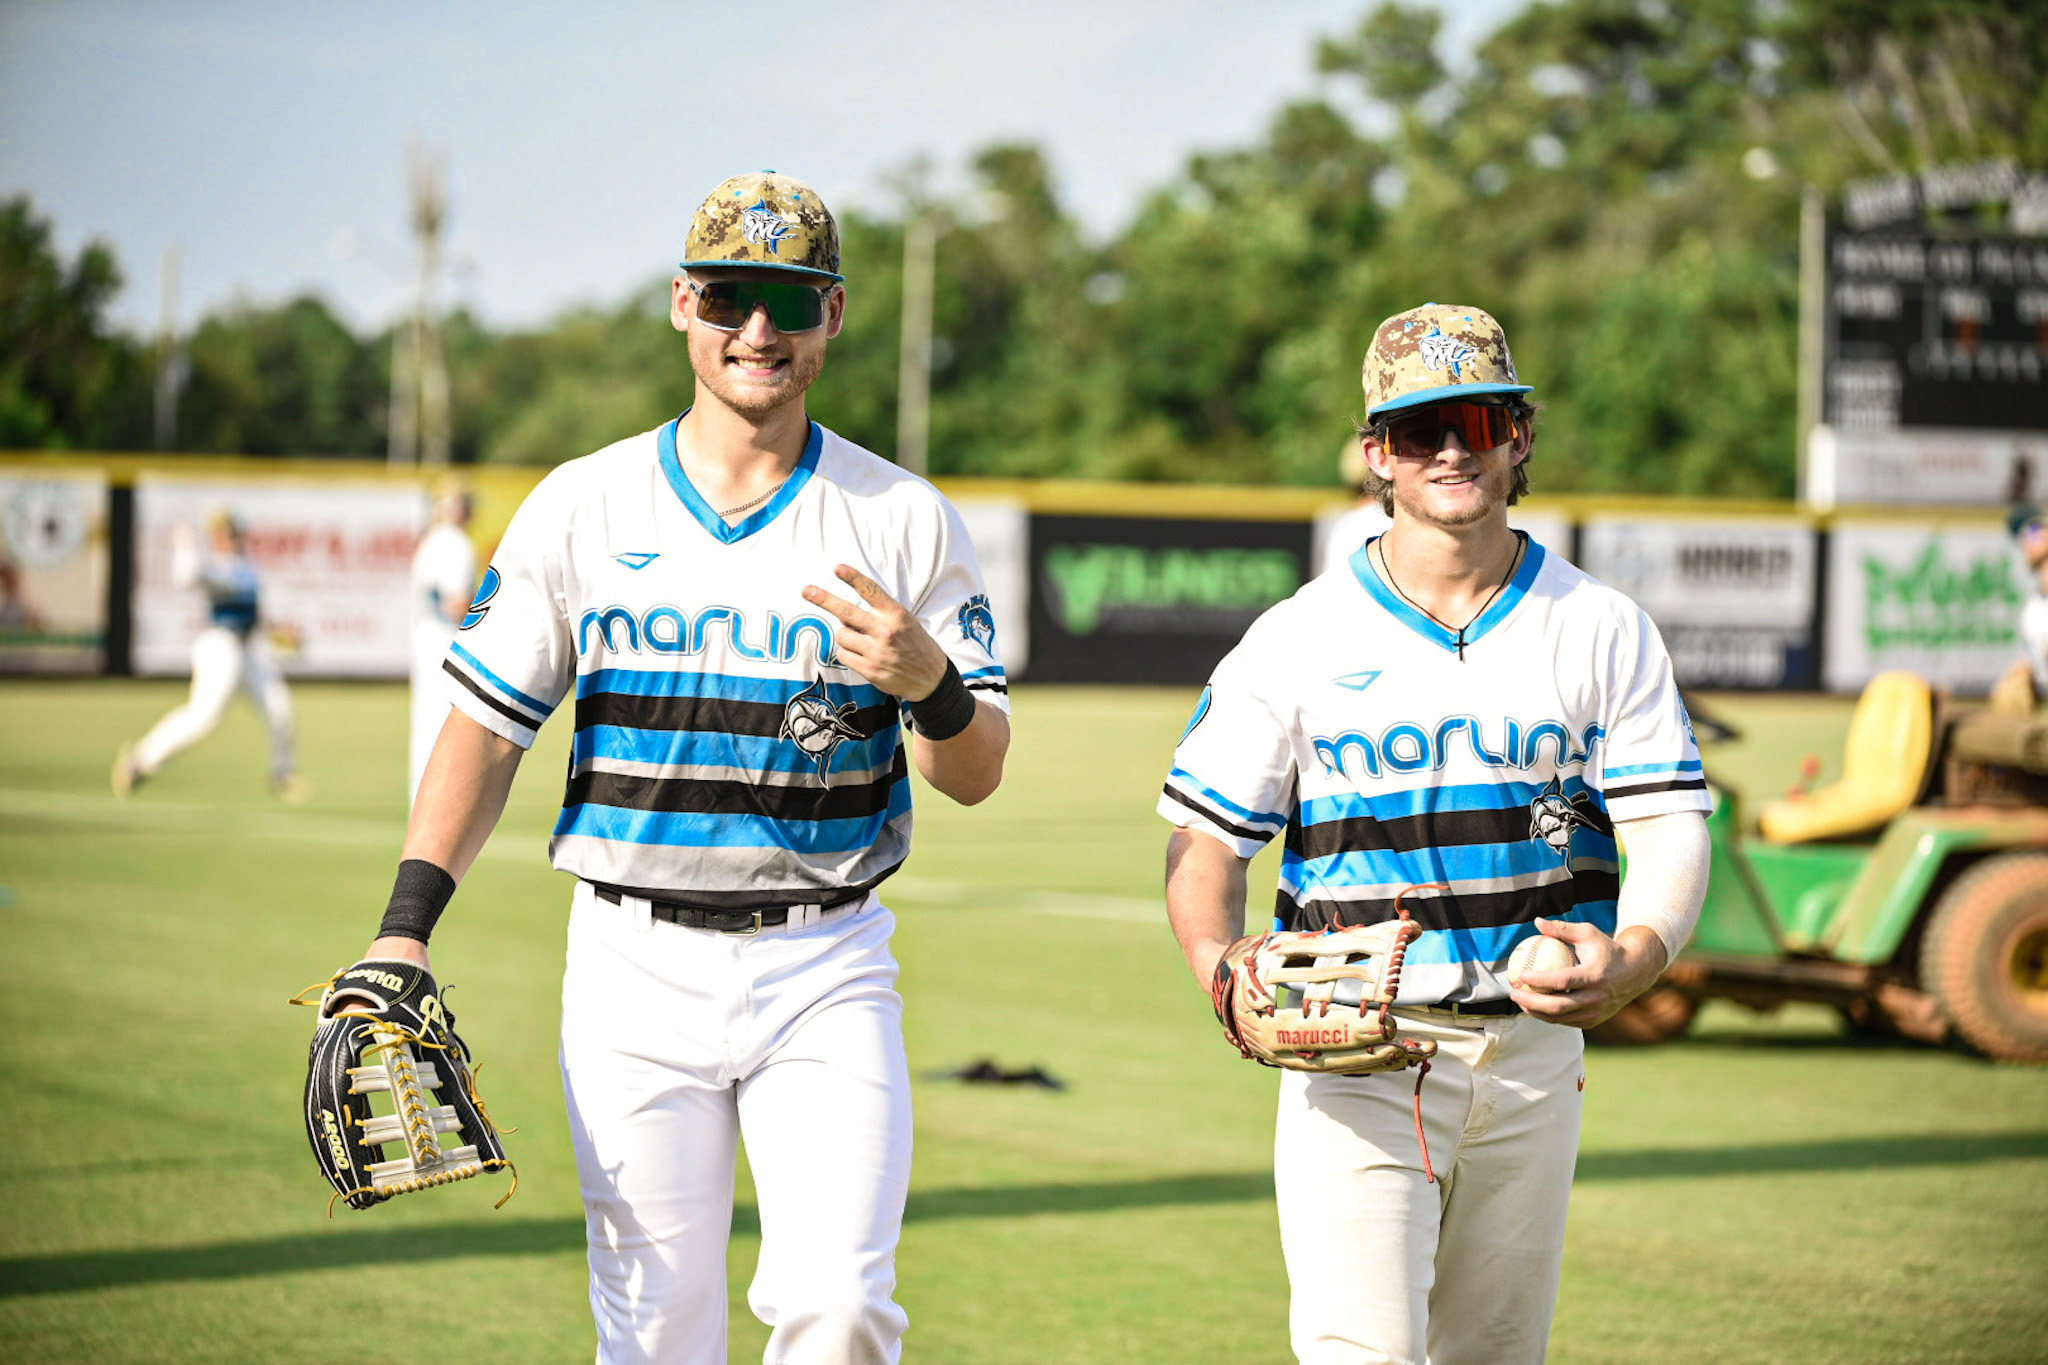 Marlins Edge Out Pilots in a Thrilling 5-4 Victory